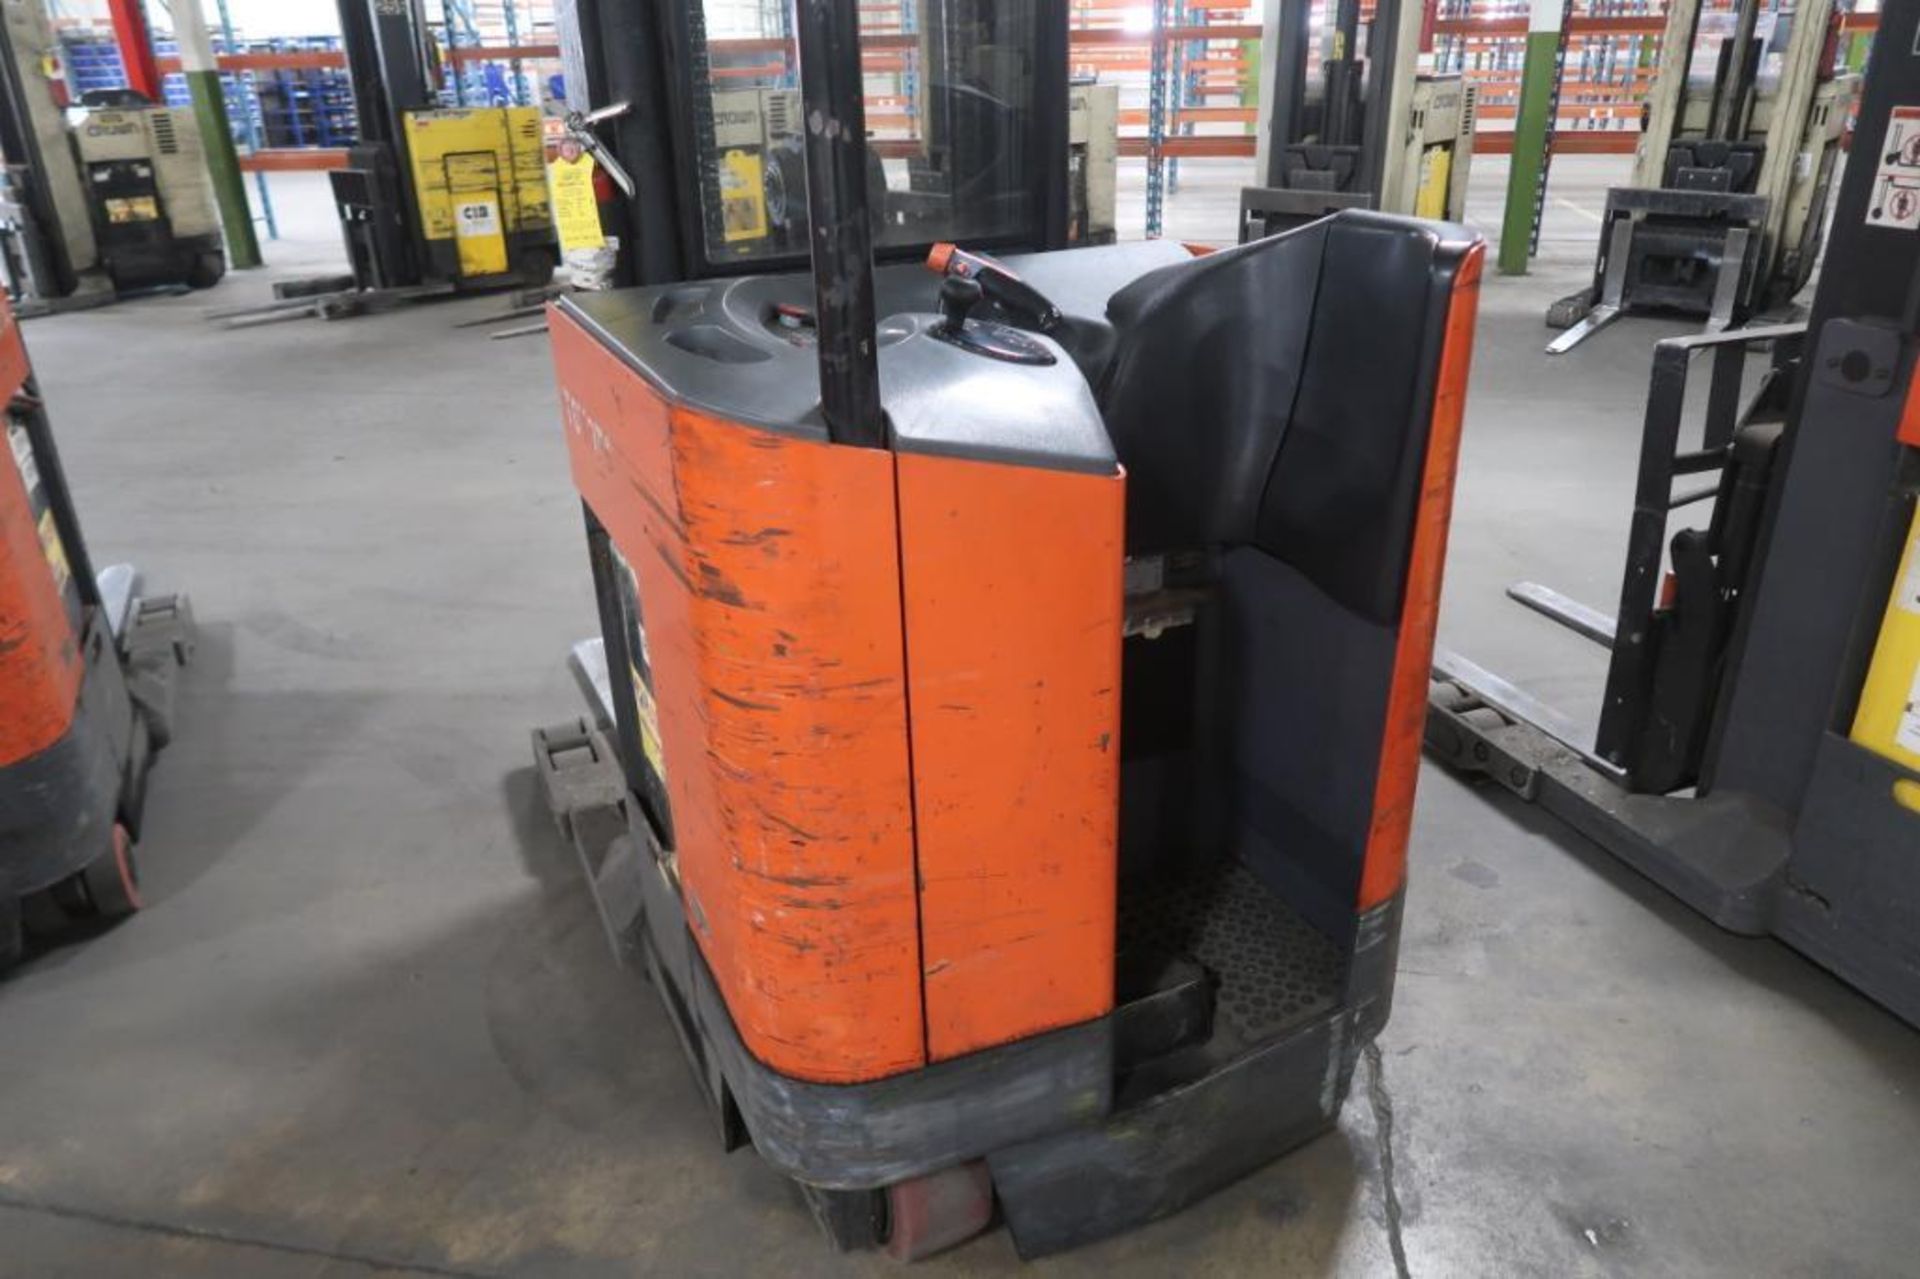 Toyota 4500 lb. Stand-up Reach Electric Forklift Model 6BR023, S/N 30554, 4184 hours, LOCATION: MAIN - Image 2 of 4